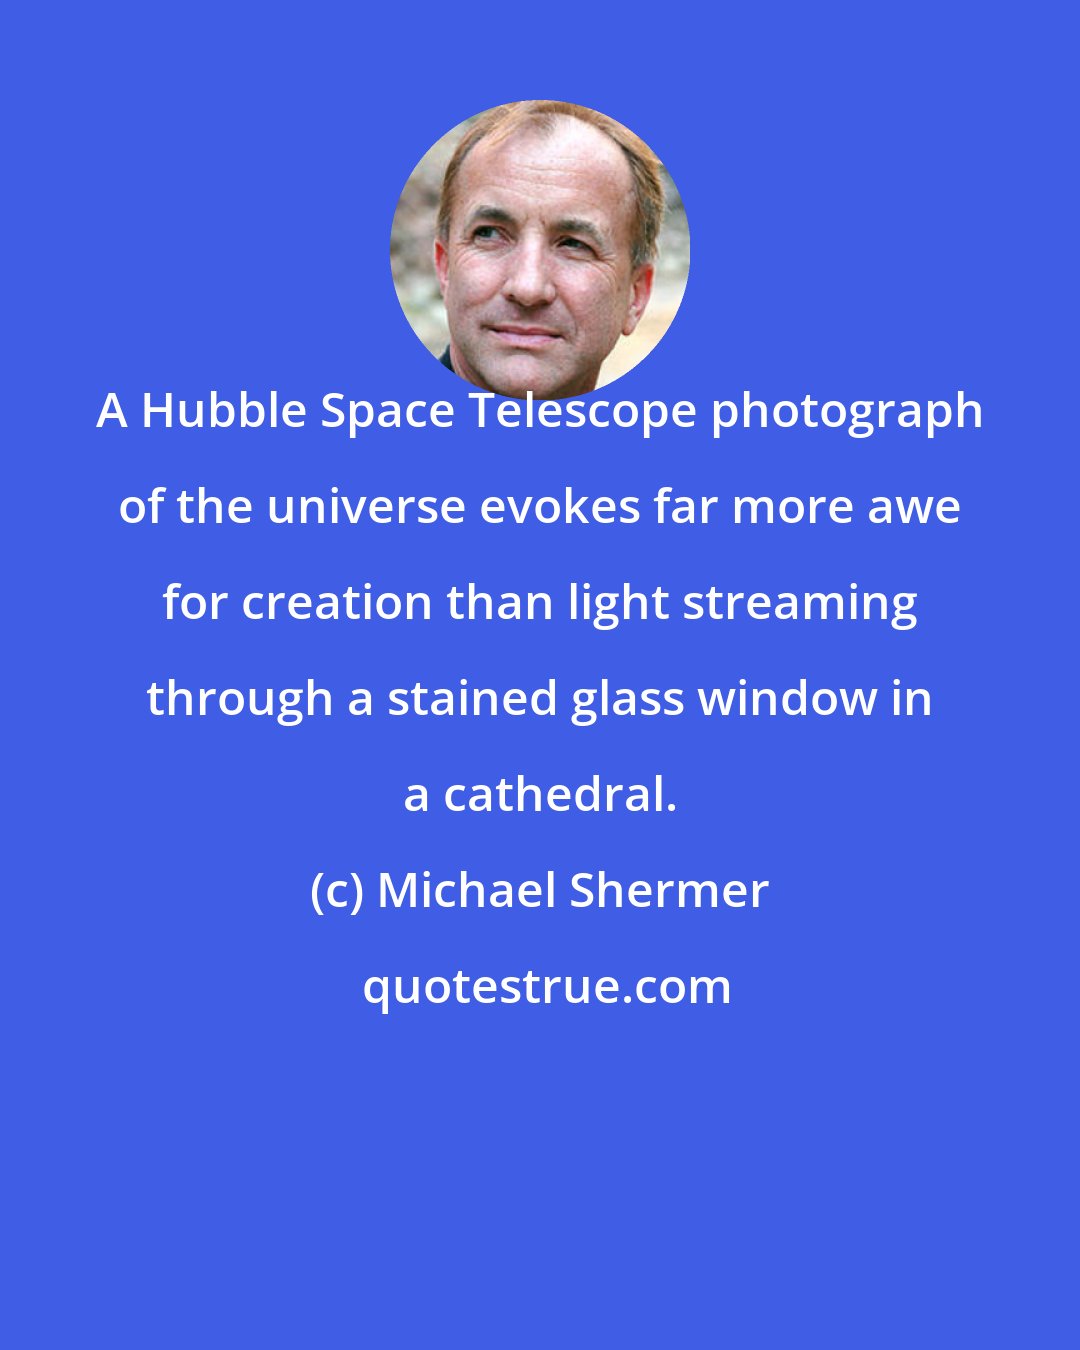 Michael Shermer: A Hubble Space Telescope photograph of the universe evokes far more awe for creation than light streaming through a stained glass window in a cathedral.